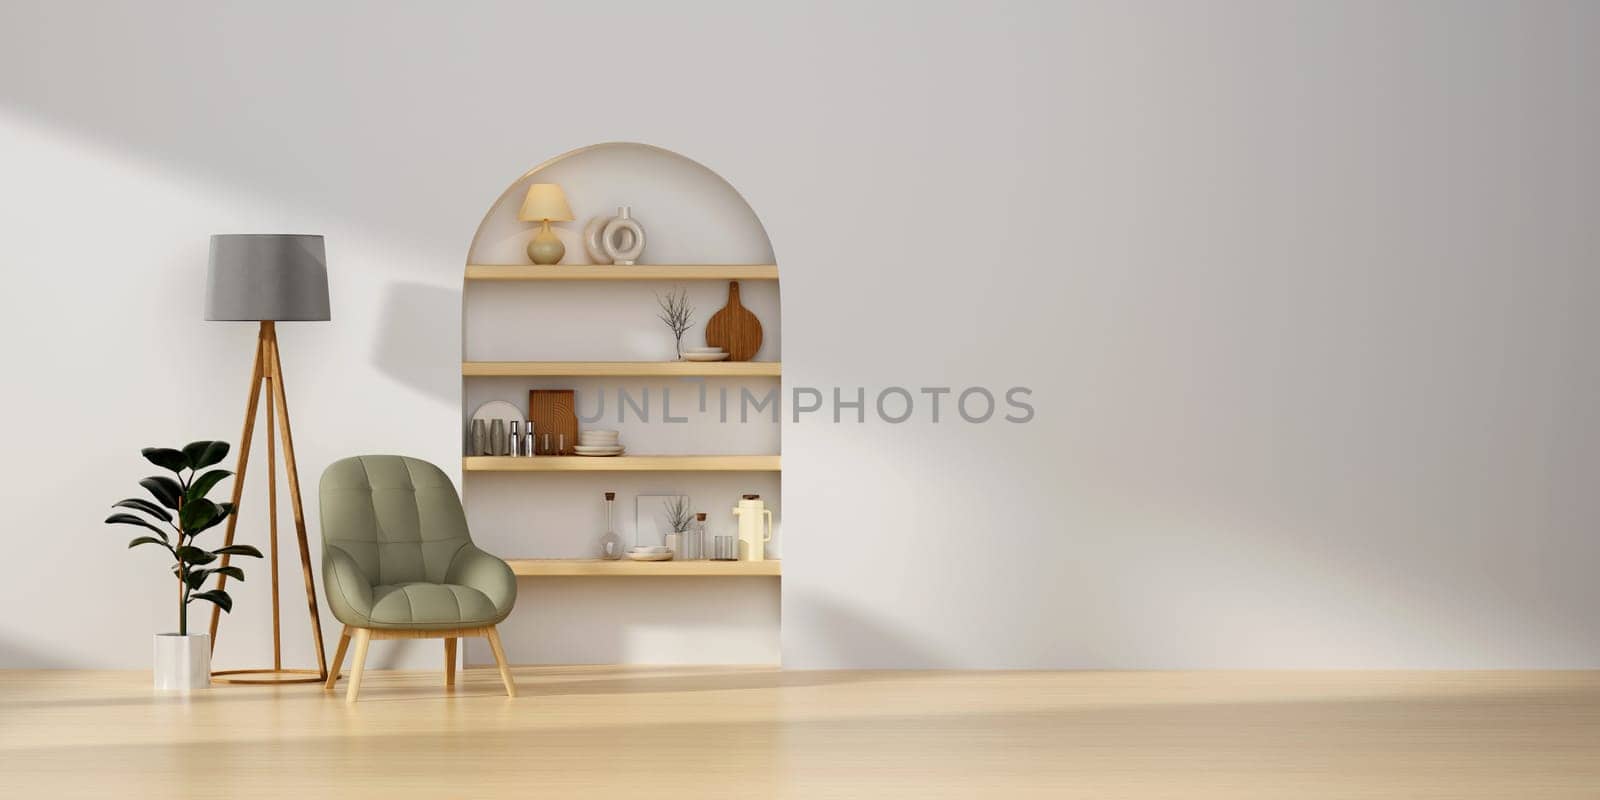 Contemporary interior living room design interior, bright walls, hardwood flooring, sofa, armchair with lamp. Concept of relax. 3d rendering by meepiangraphic